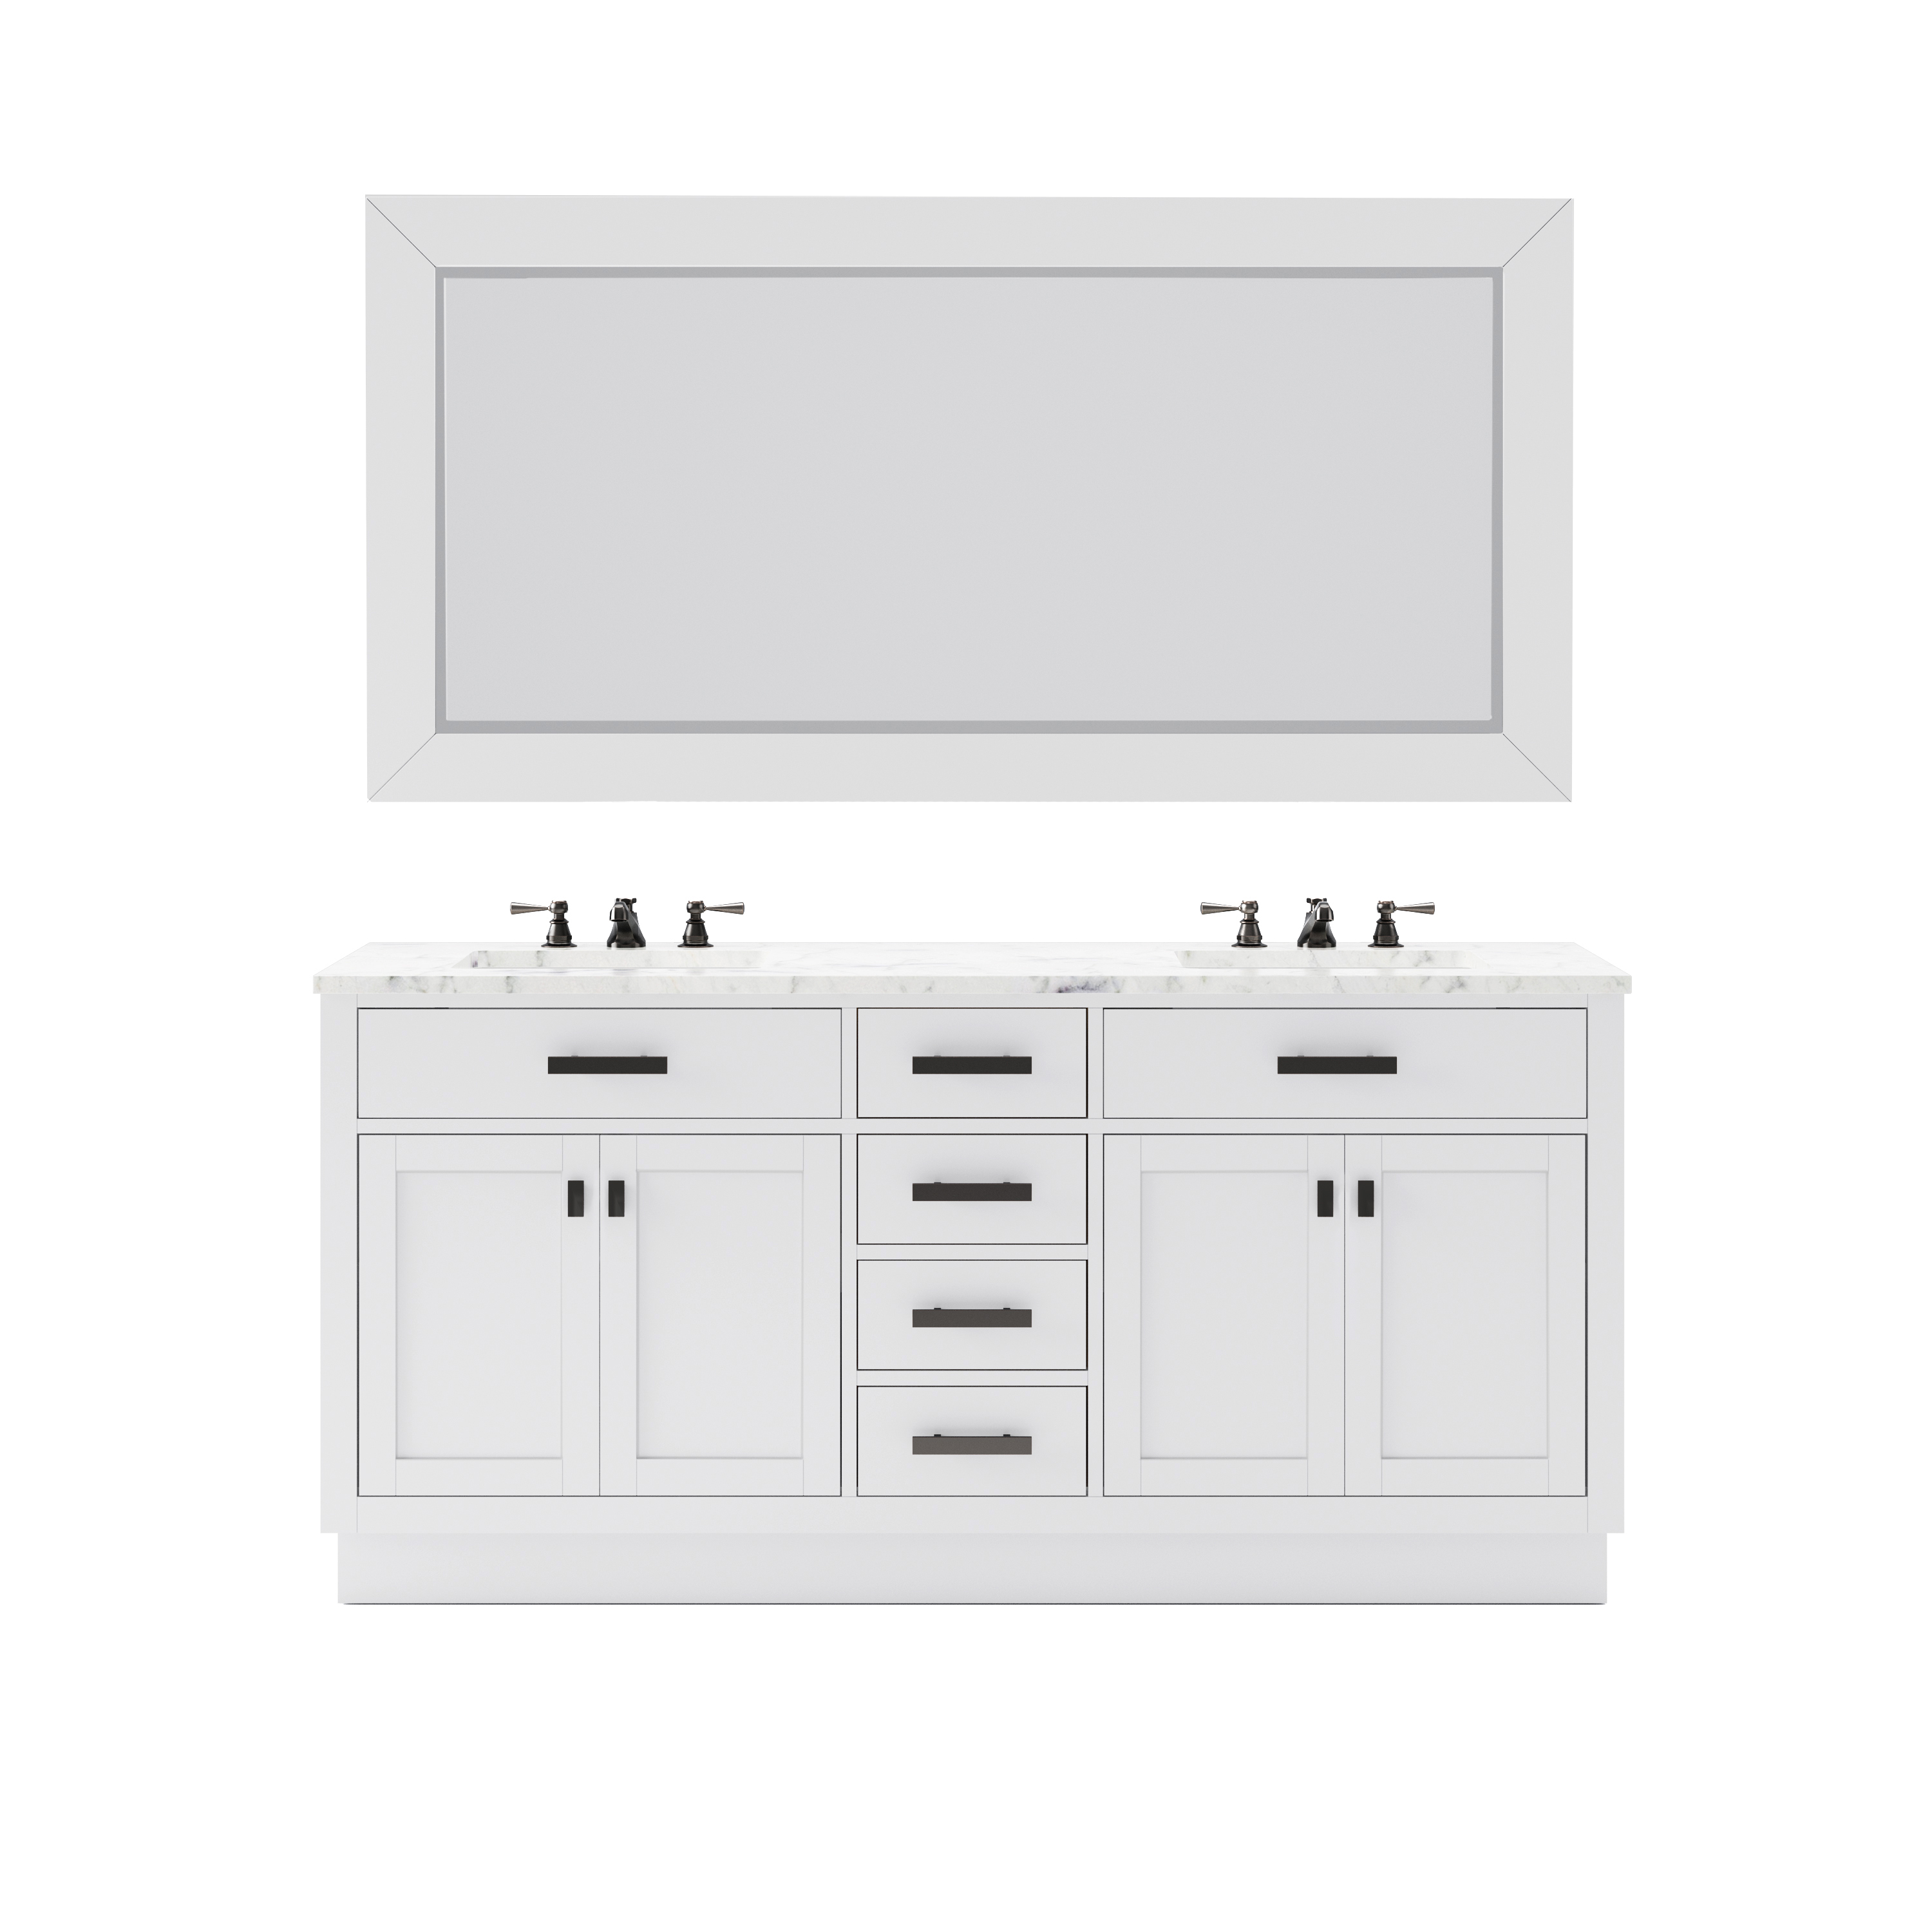 72" Double Sink Carrara White Marble Countertop Bath Vanity in Pure White with Faucet and Mirror Options